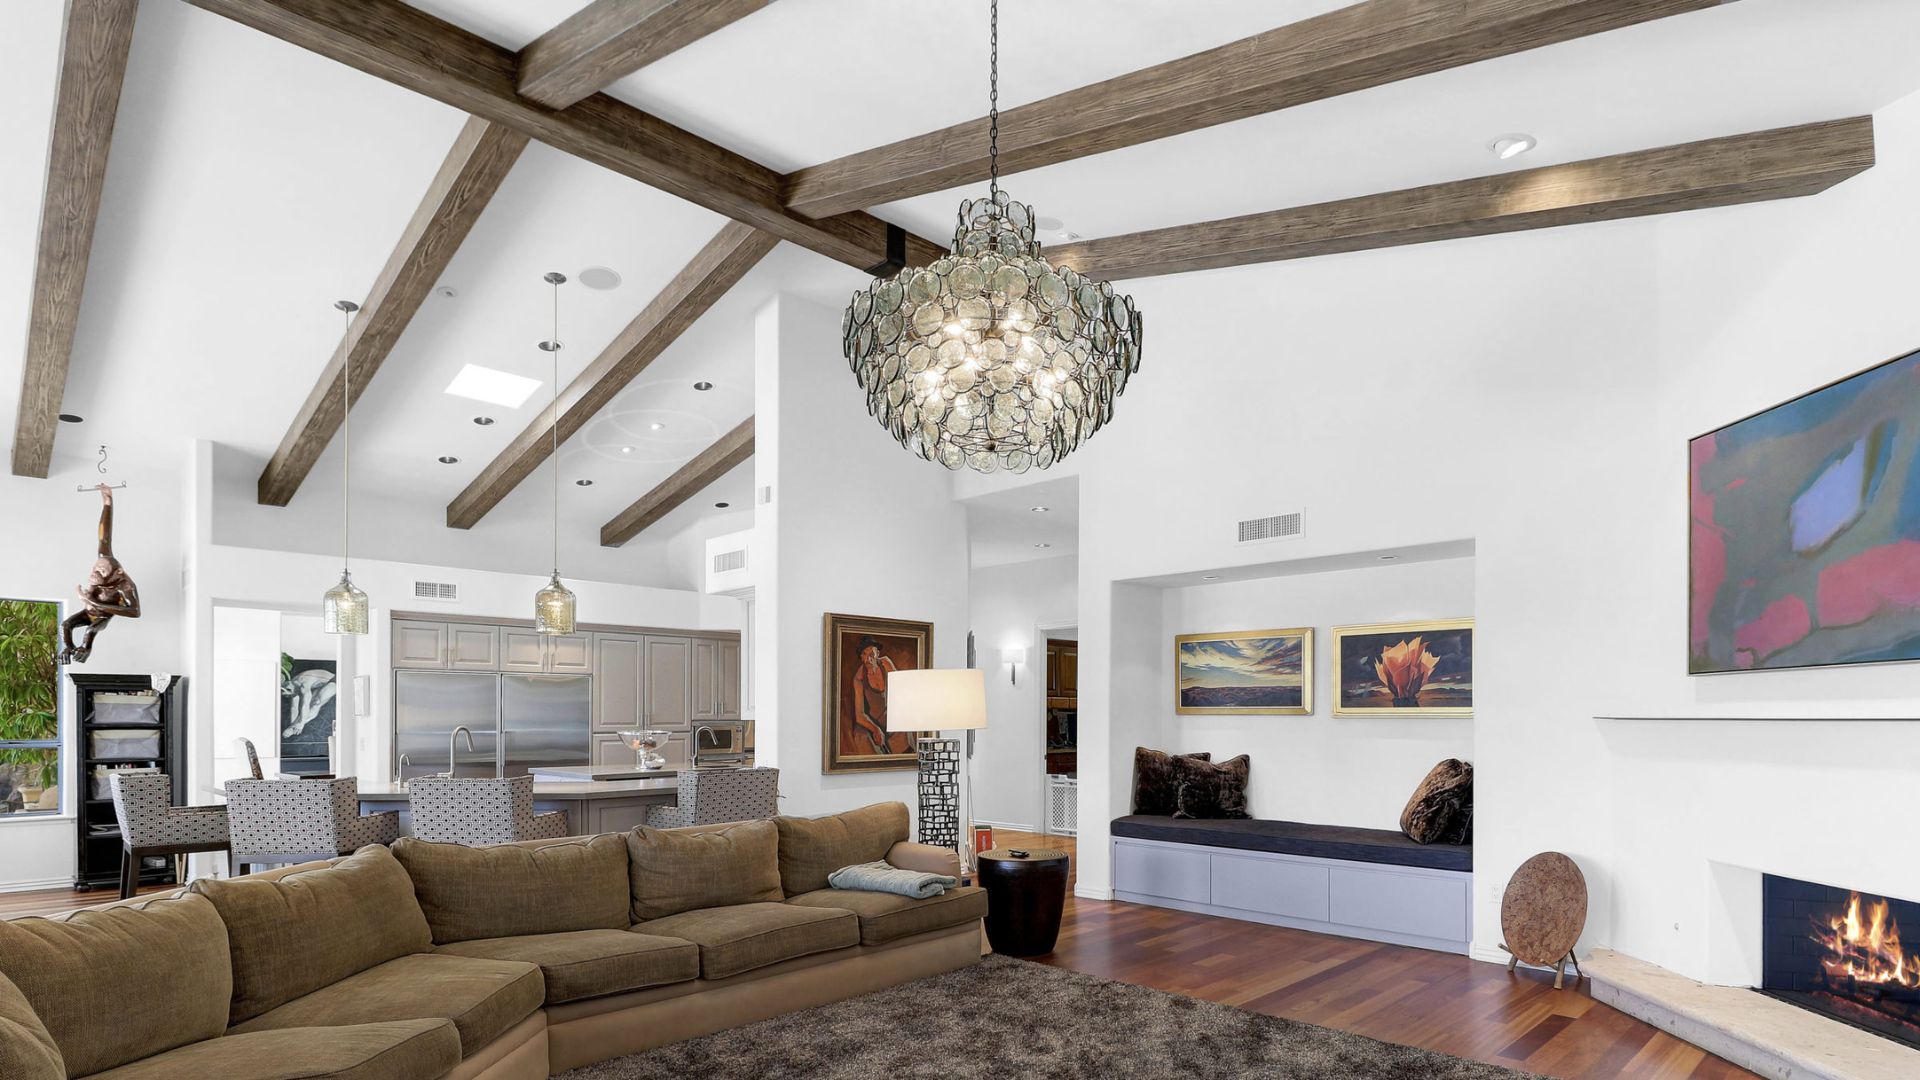 Living room with faux wood beams